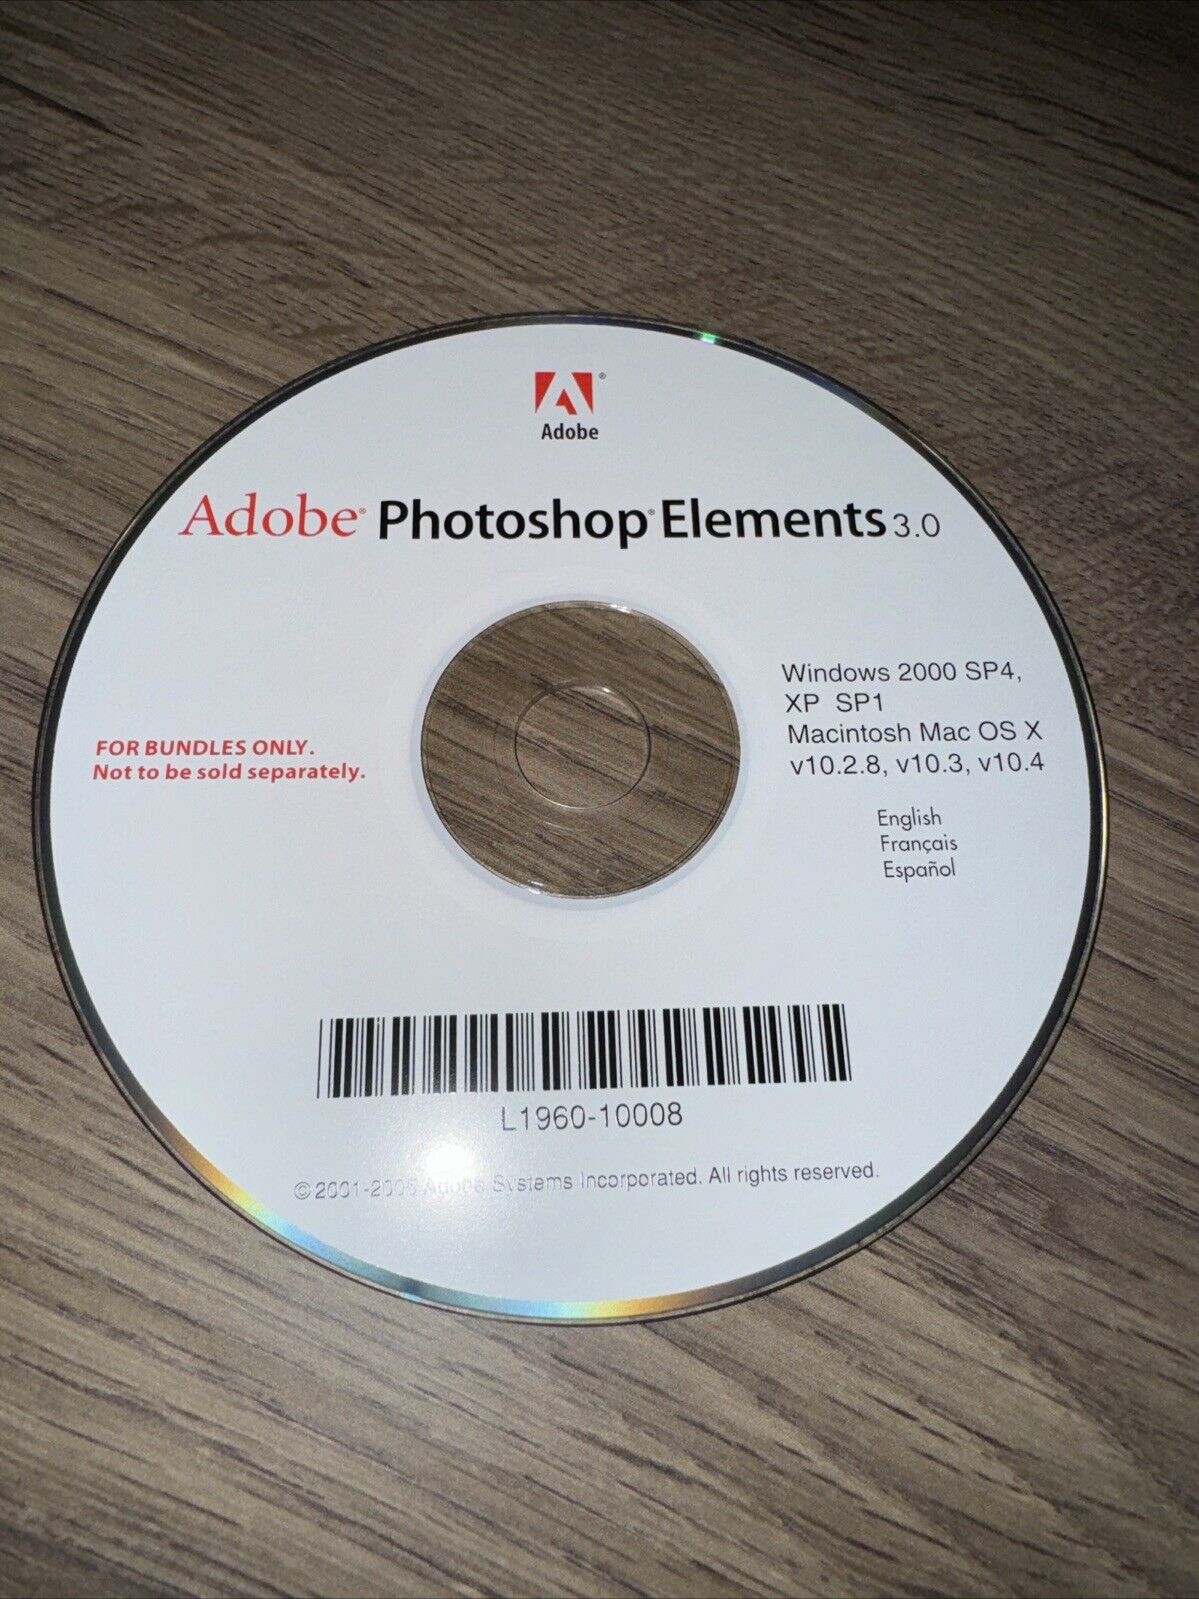 BRAND NEW Adobe Photoshop Elements 3.0 2004 With Serial Number/Registration Key